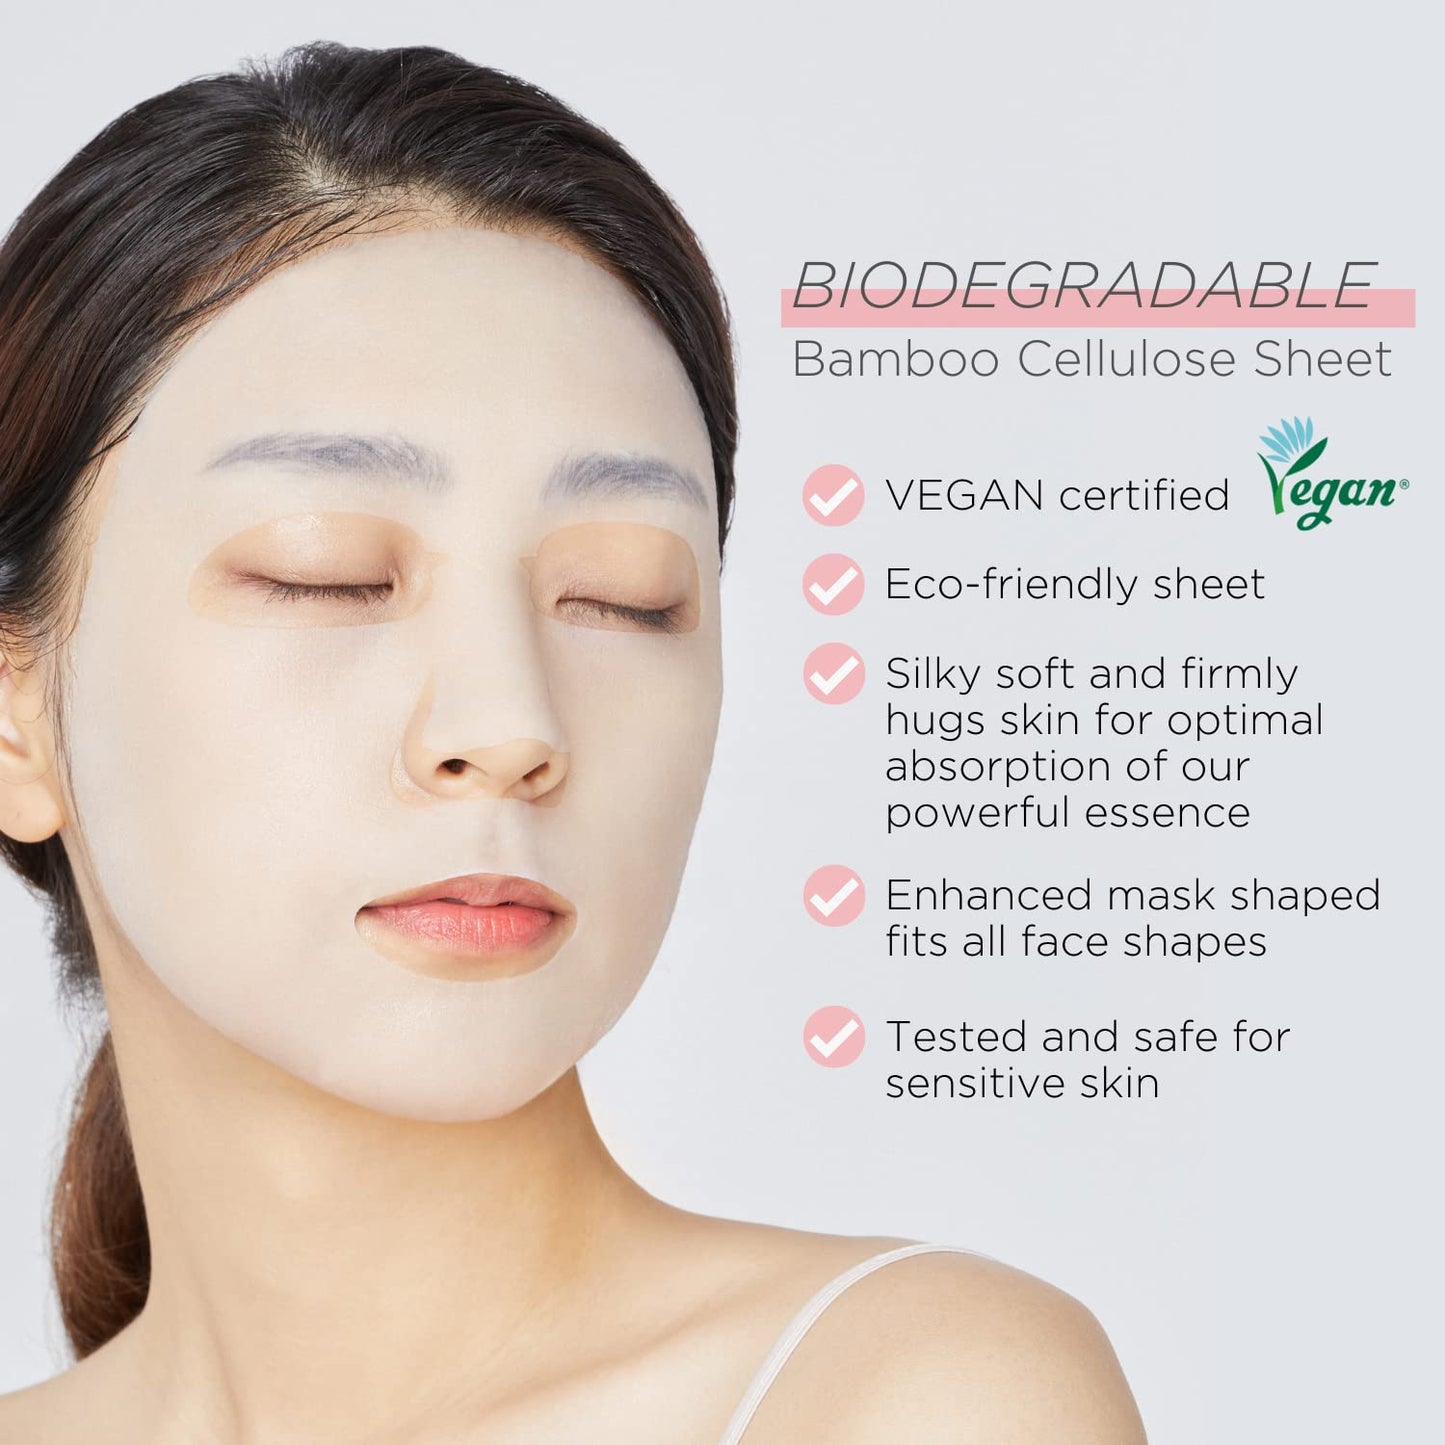 Mediheal Sheet Mask New Essential HERO 10 pack (Collagen, Tea Tree, Placenta, Madecassoside, Vita, Watermide)| Korean Skincare Facial Sheet Mask Combo, Moisturizing, Soothing and for Blemishes